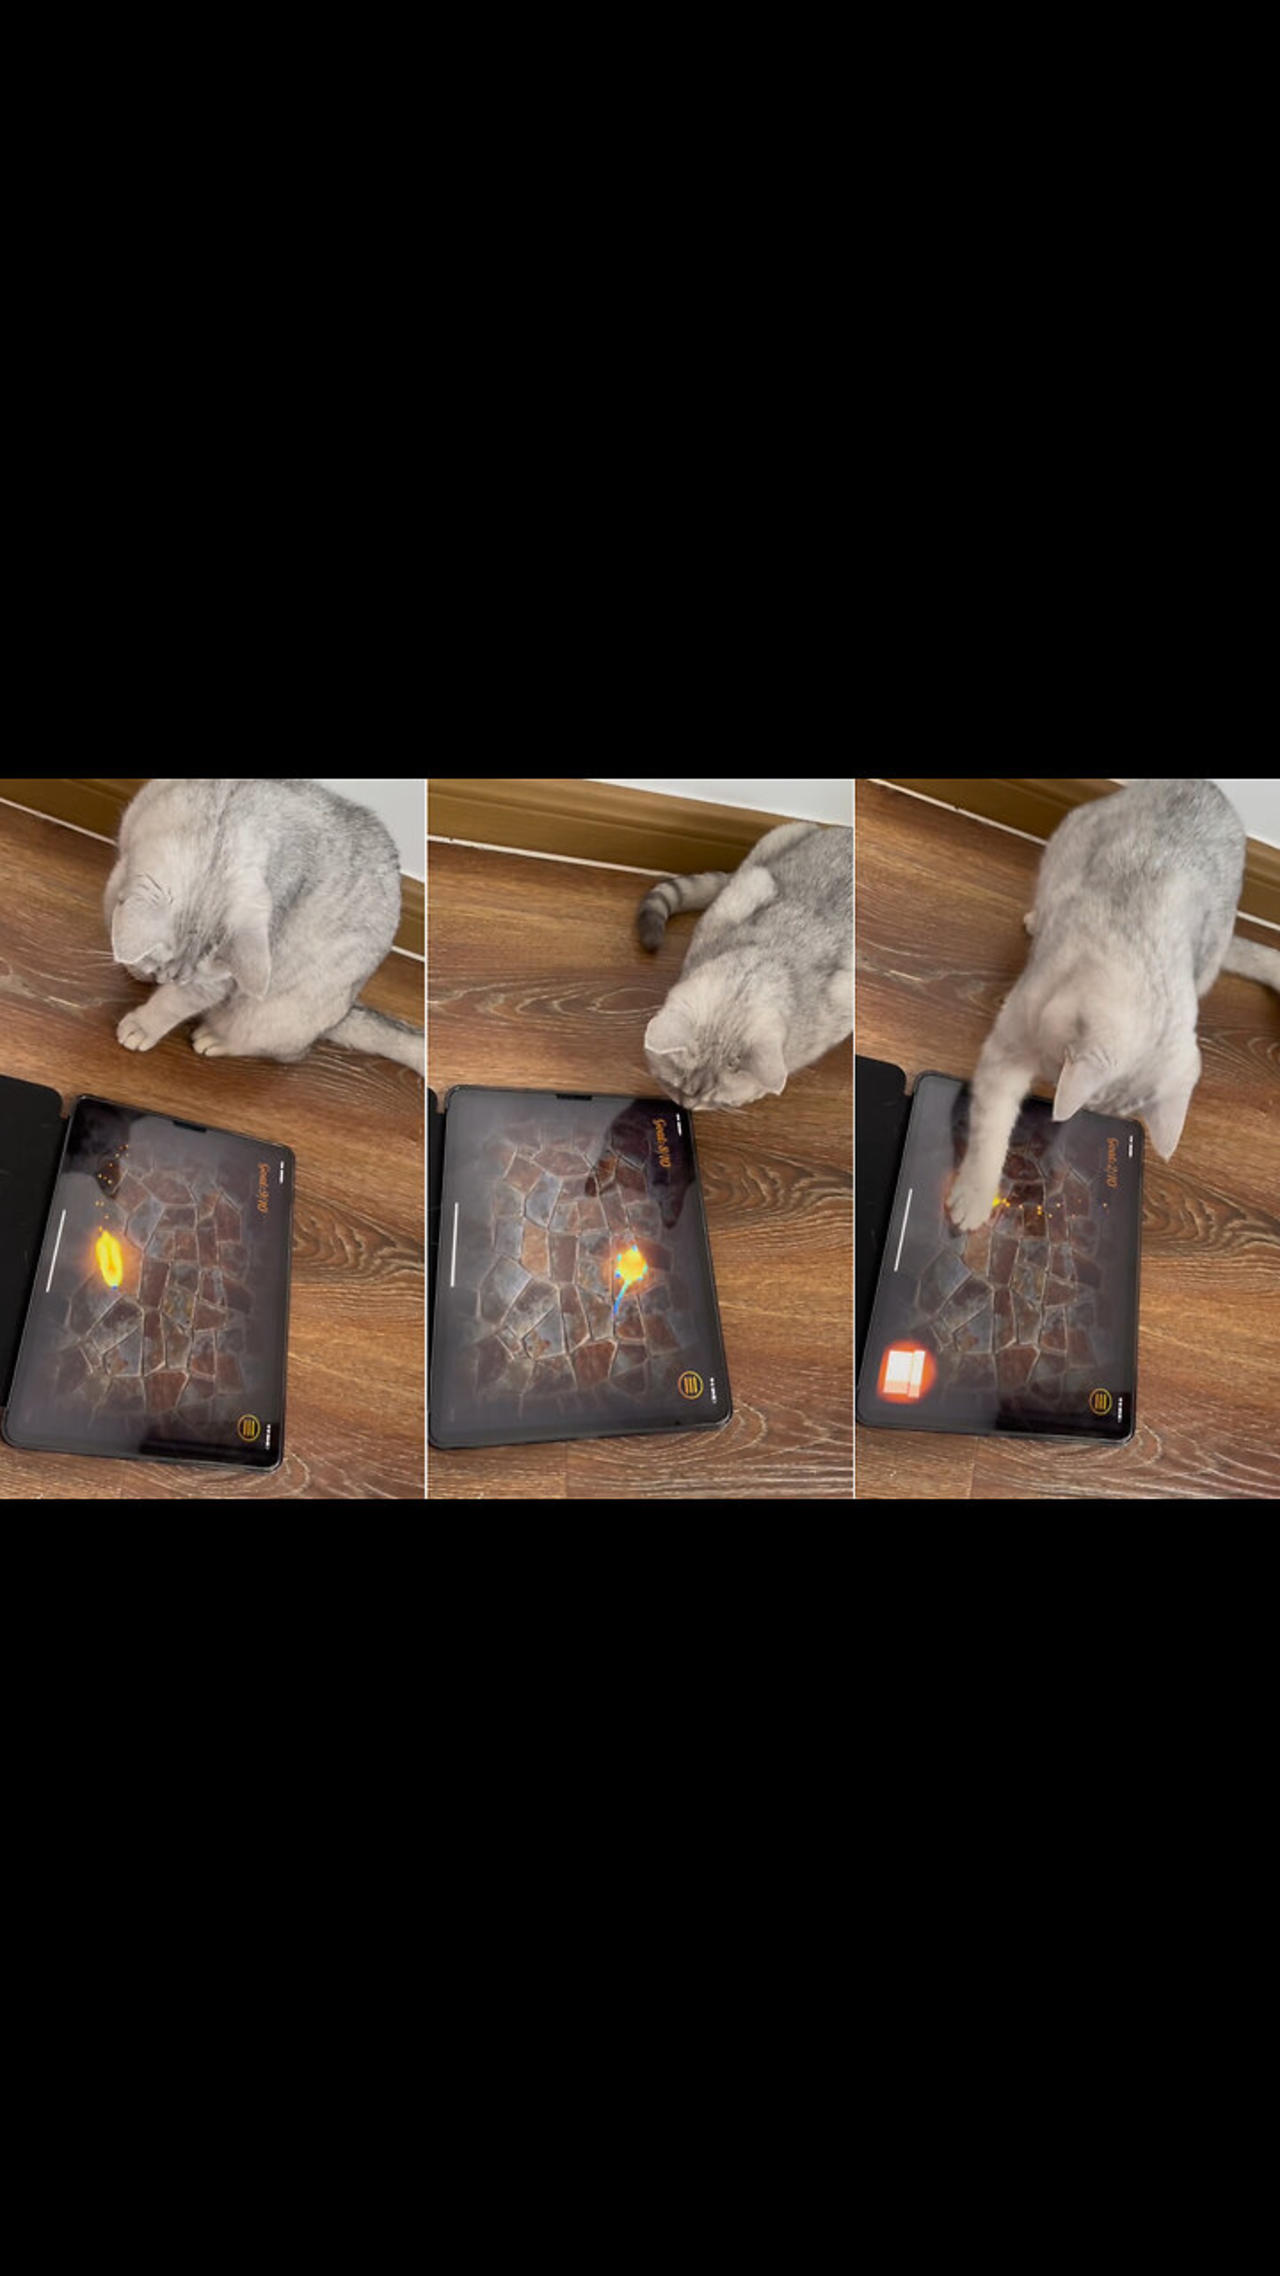 My cat is addicted to playing ipad games!